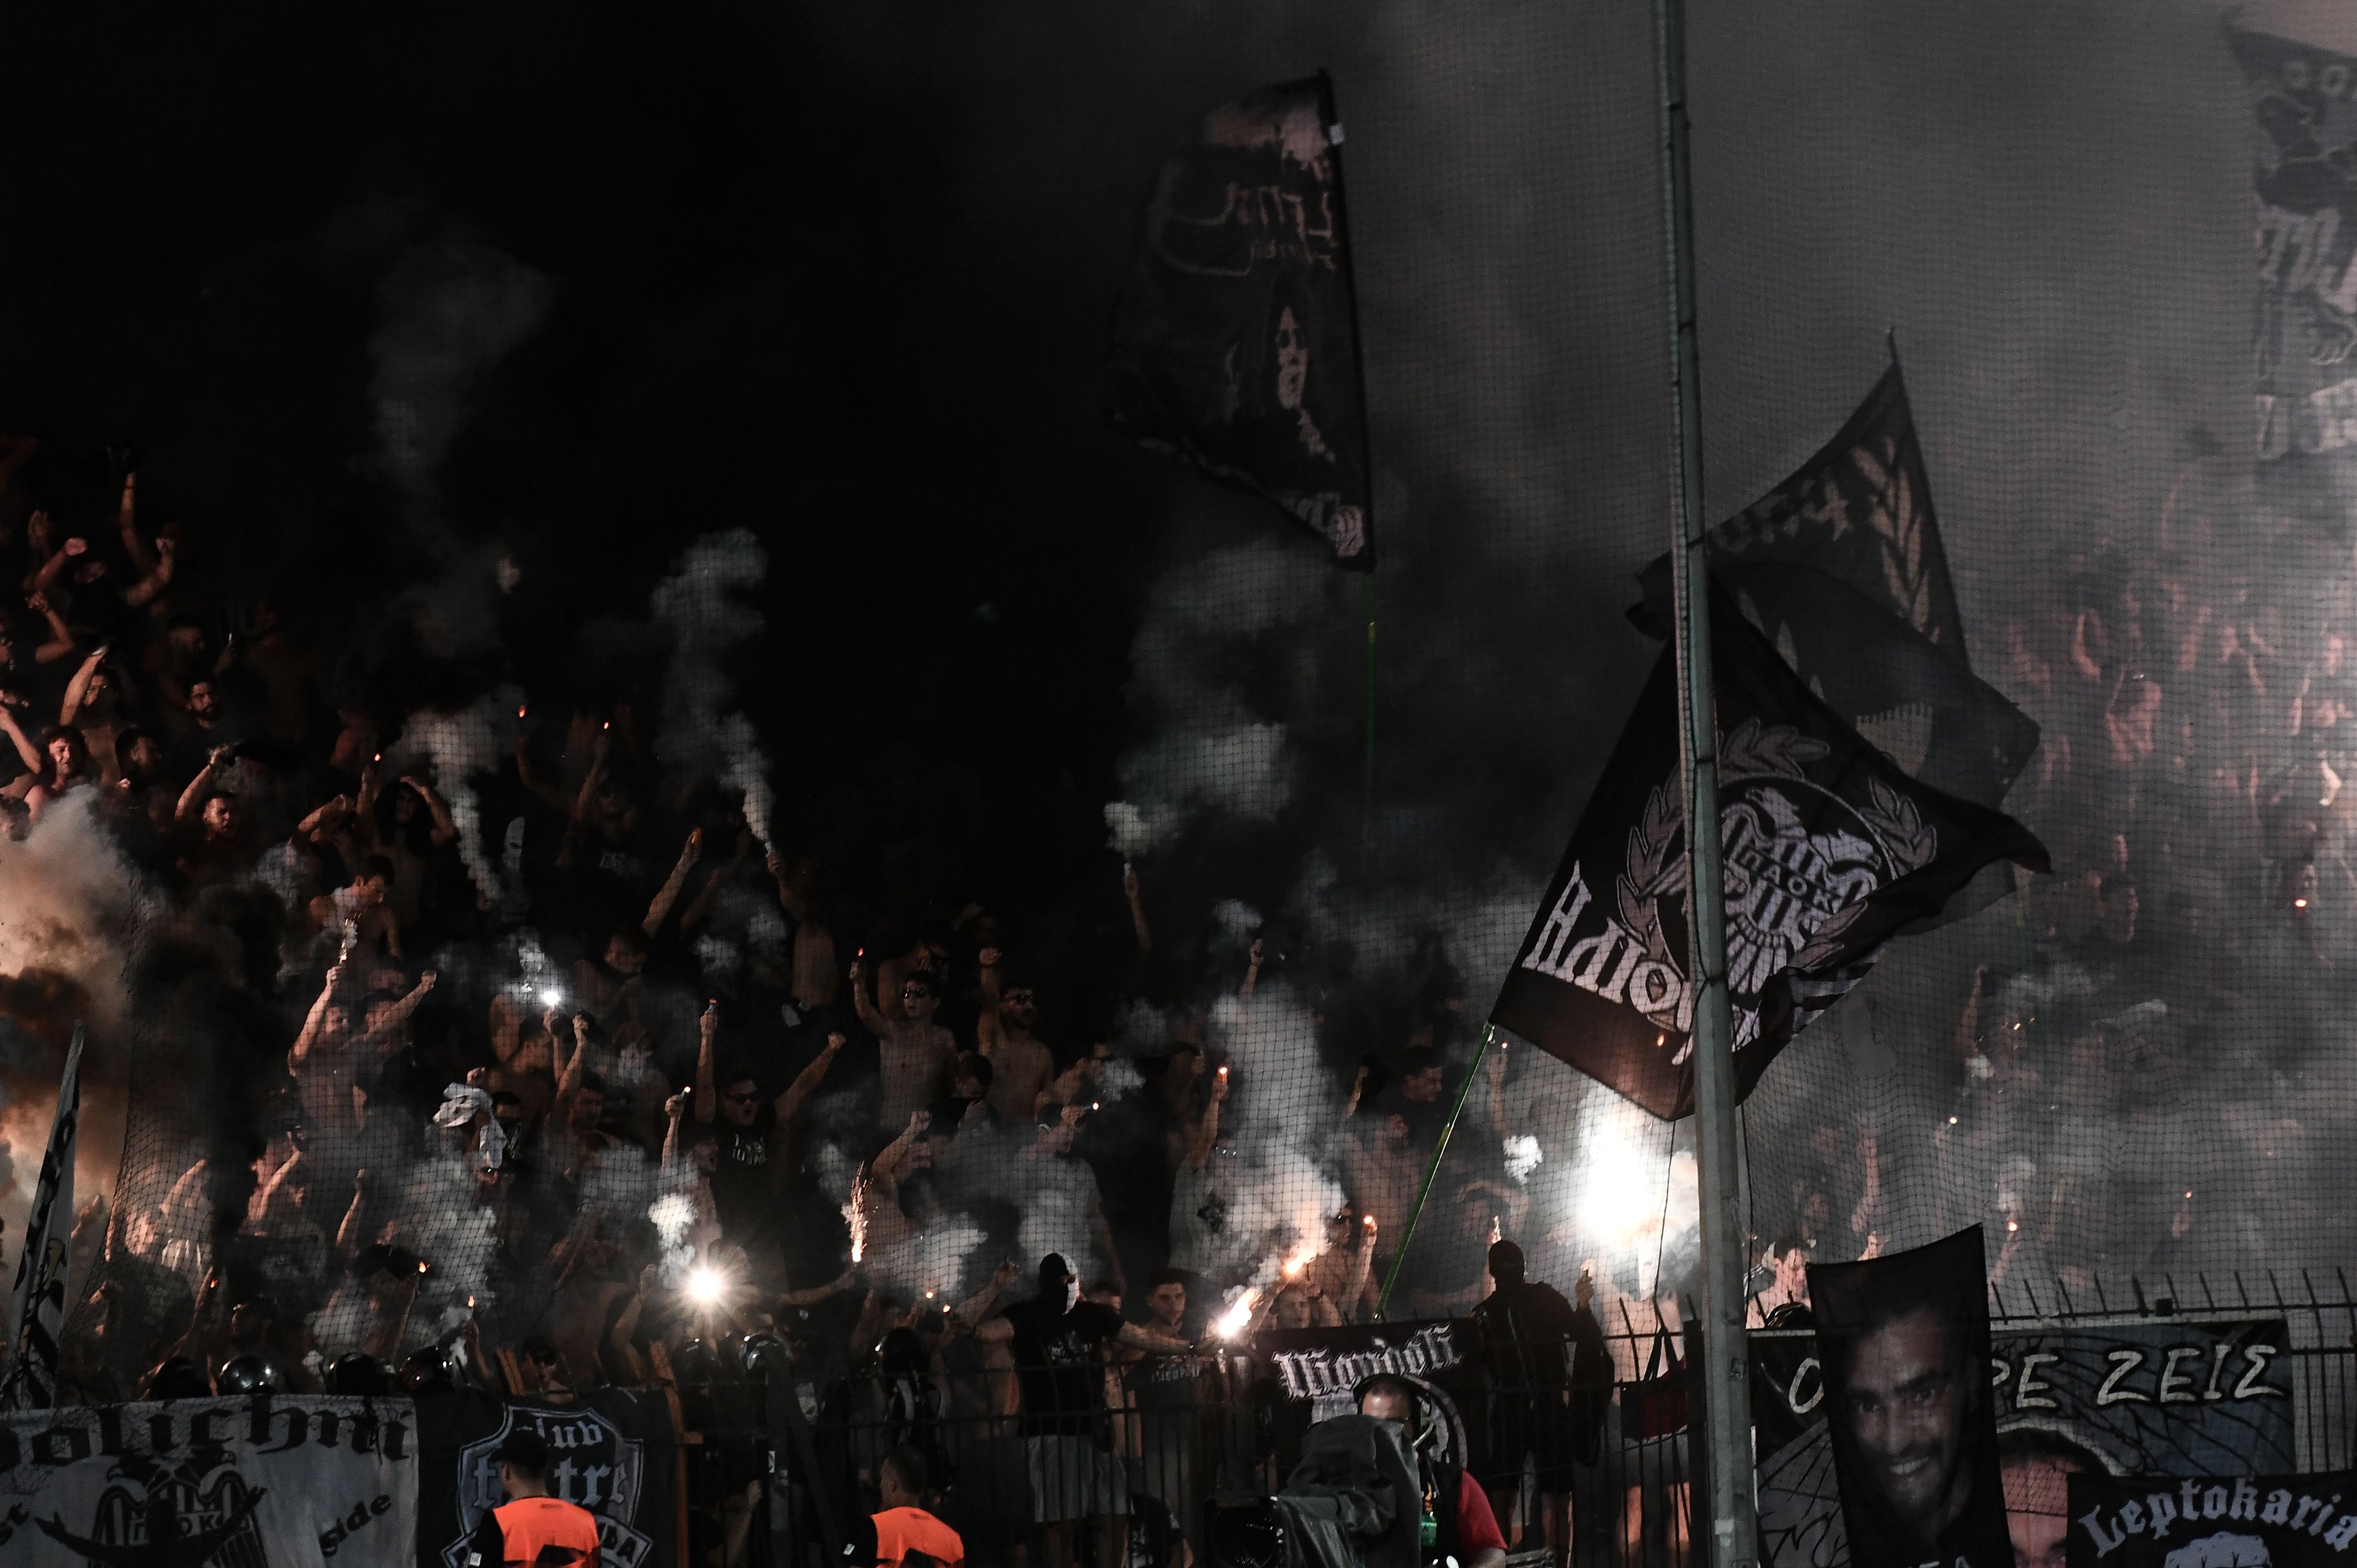 PAOK fans burn flares  during the UEFA Europa League Group L first-leg football match between PAOK Thessaloniki and Chelsea at the Toumba stadium in Thessaloniki on September 20, 2018. (Photo by Sakis MITROLIDIS / AFP)        (Photo credit should read SAKIS MITROLIDIS/AFP/Getty Images)